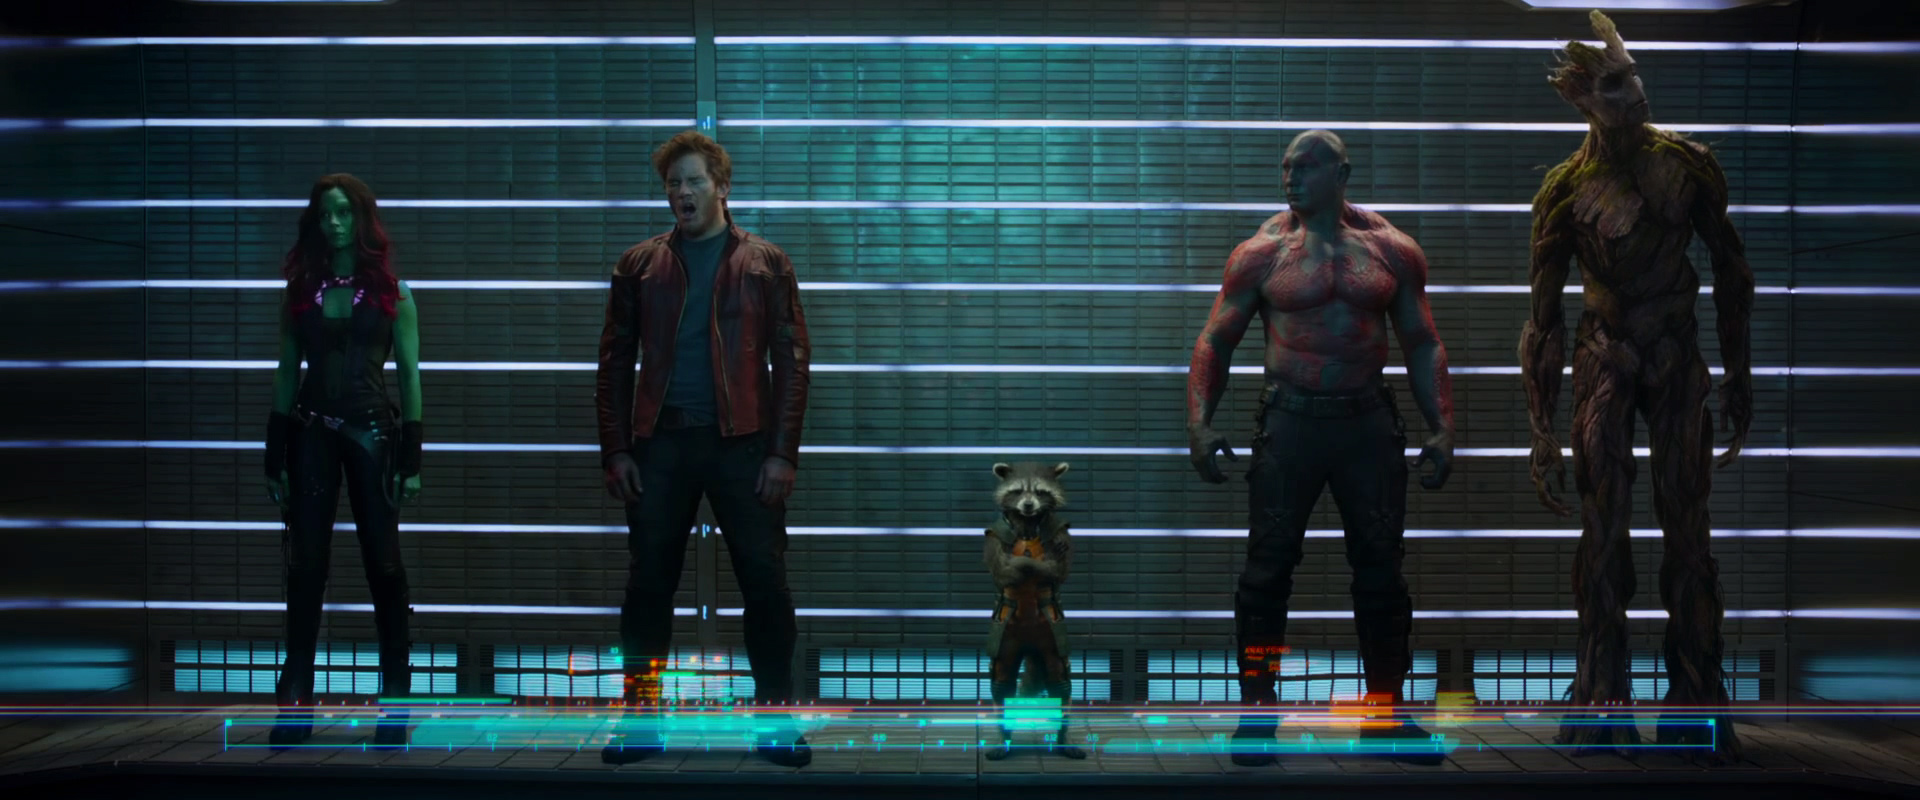 fantastic-trailer-for-guardians-of-the-galaxy-10.jpg